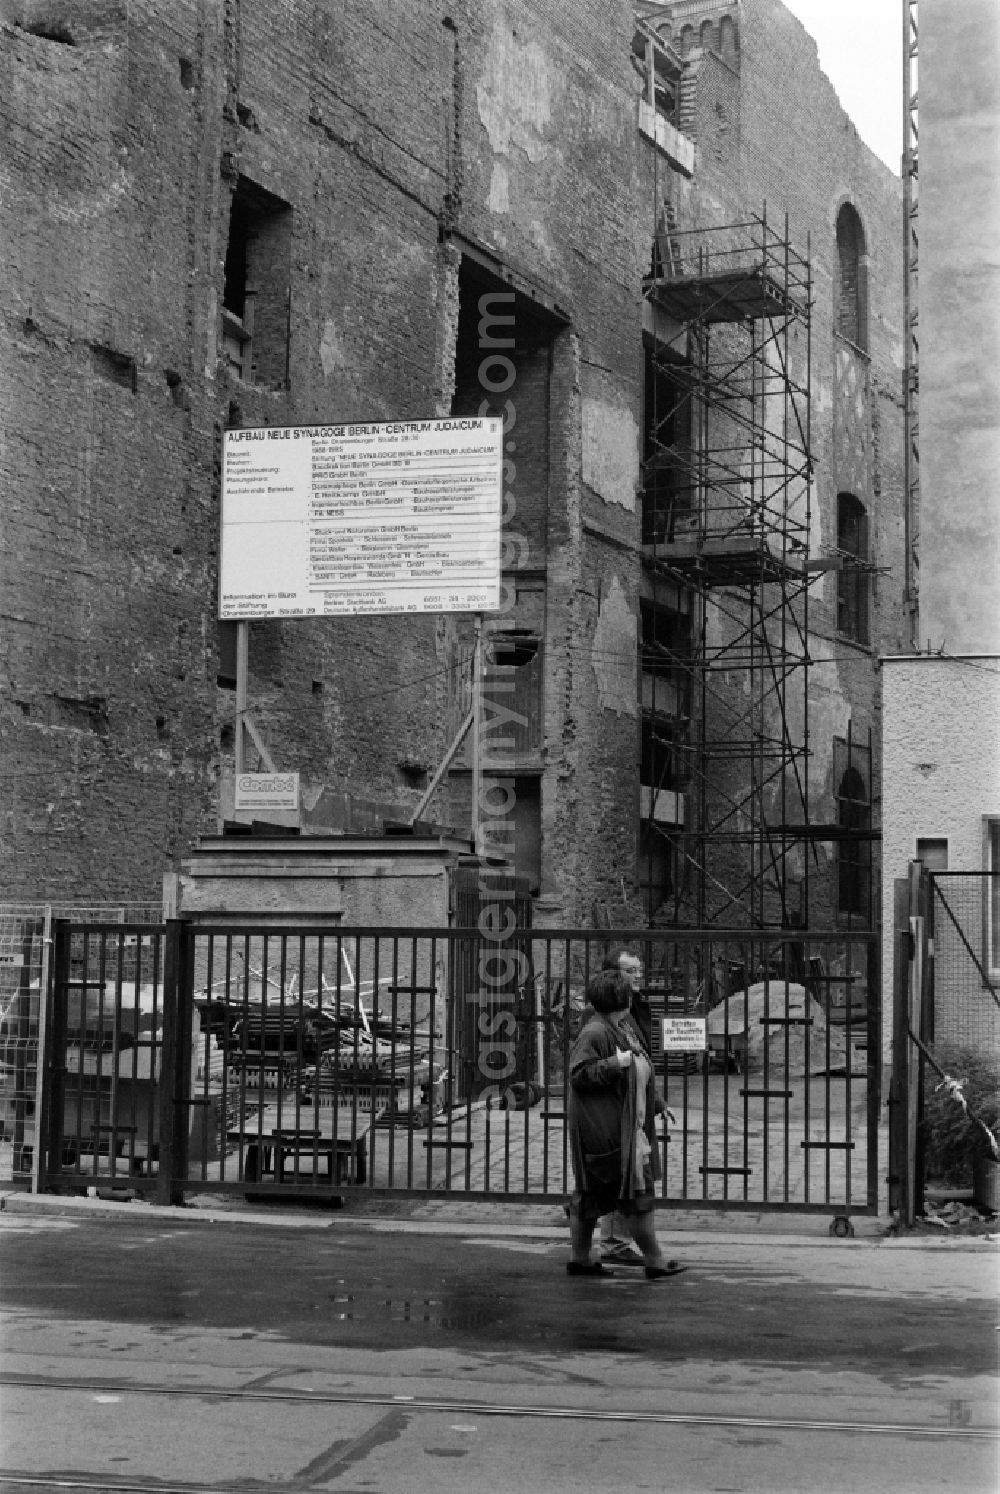 GDR picture archive: Berlin - New synagogue - Centrum Judaicum during reconstruction works in Oranienburger Strasse in Berlin - Mitte, the former capital of the GDR, German Democratic Republic